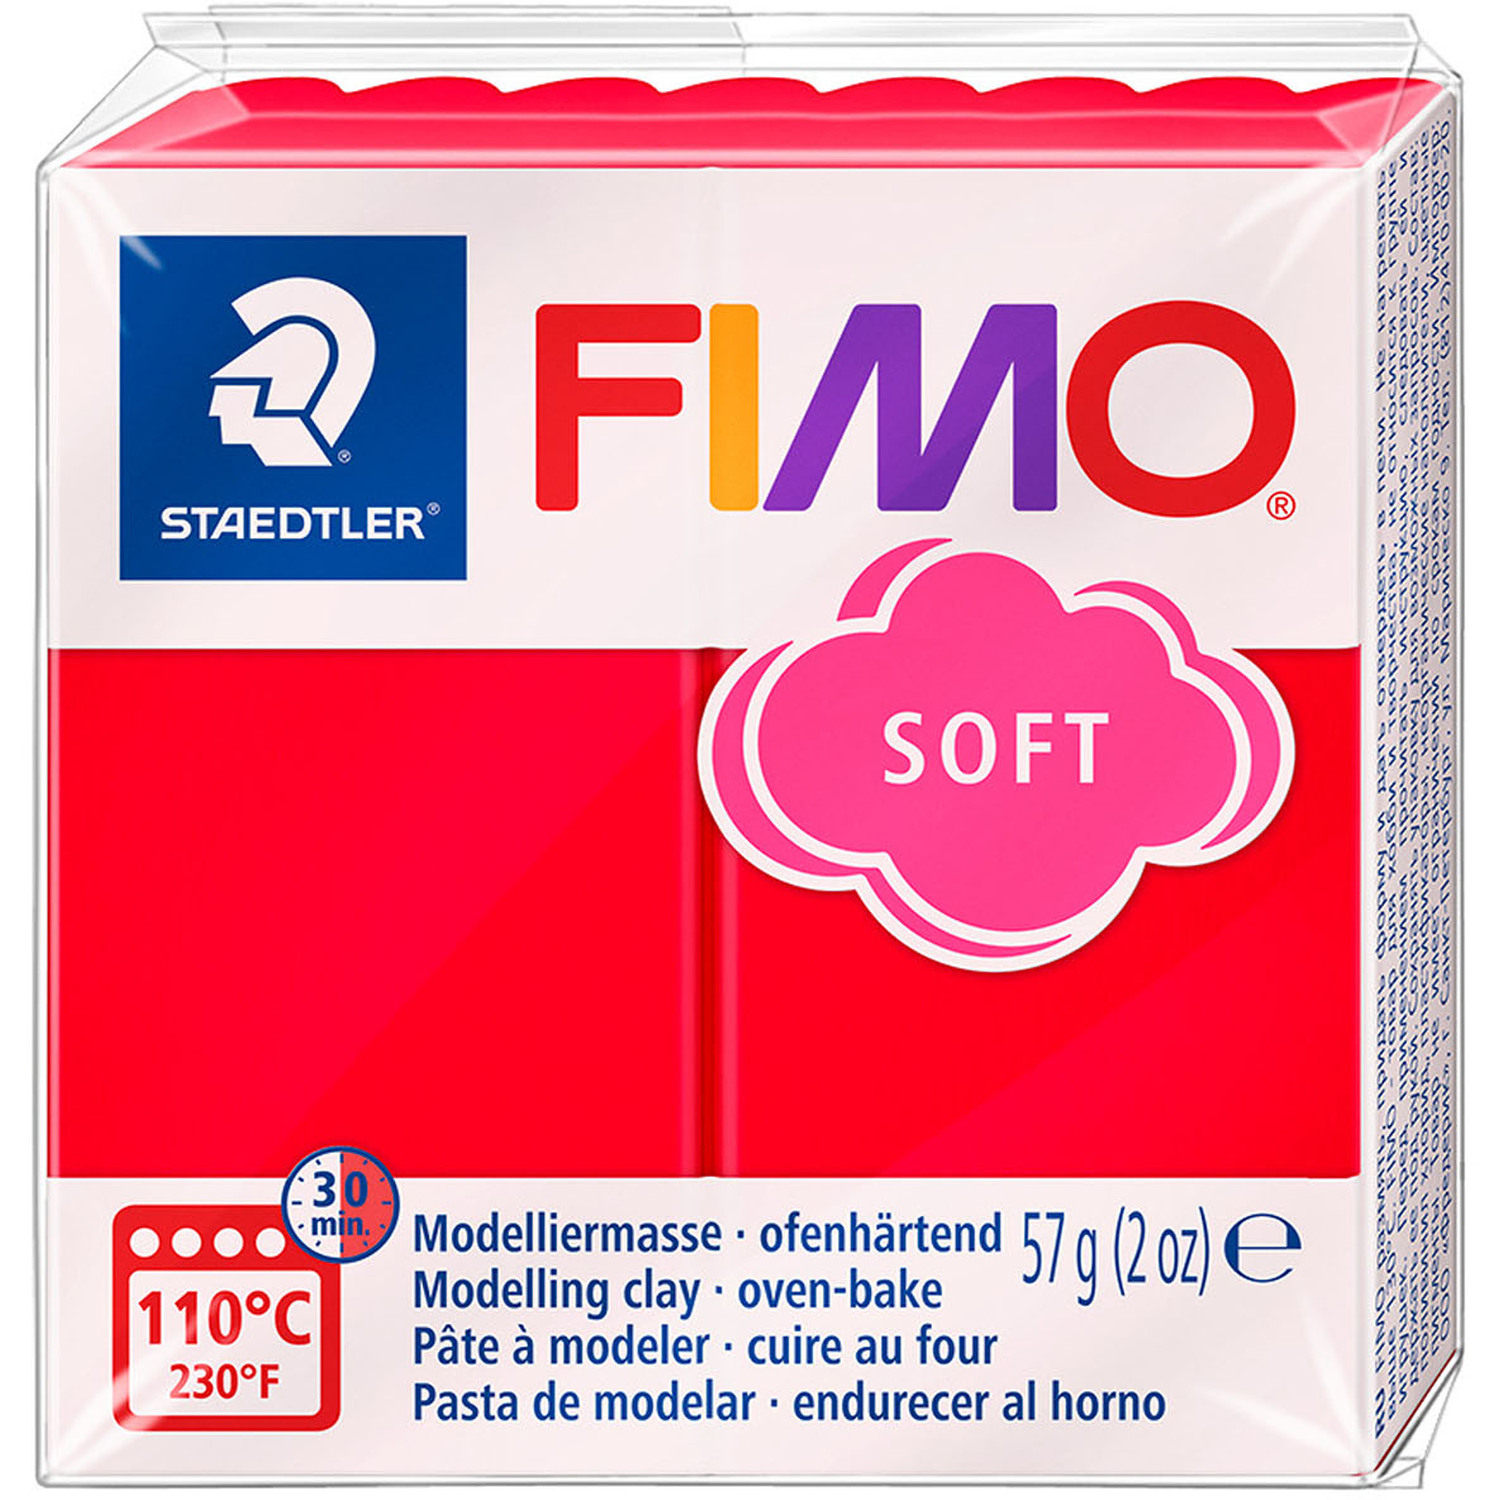 Staedtler FIMO Soft Modelling Clay Block - Indian Red Image 1